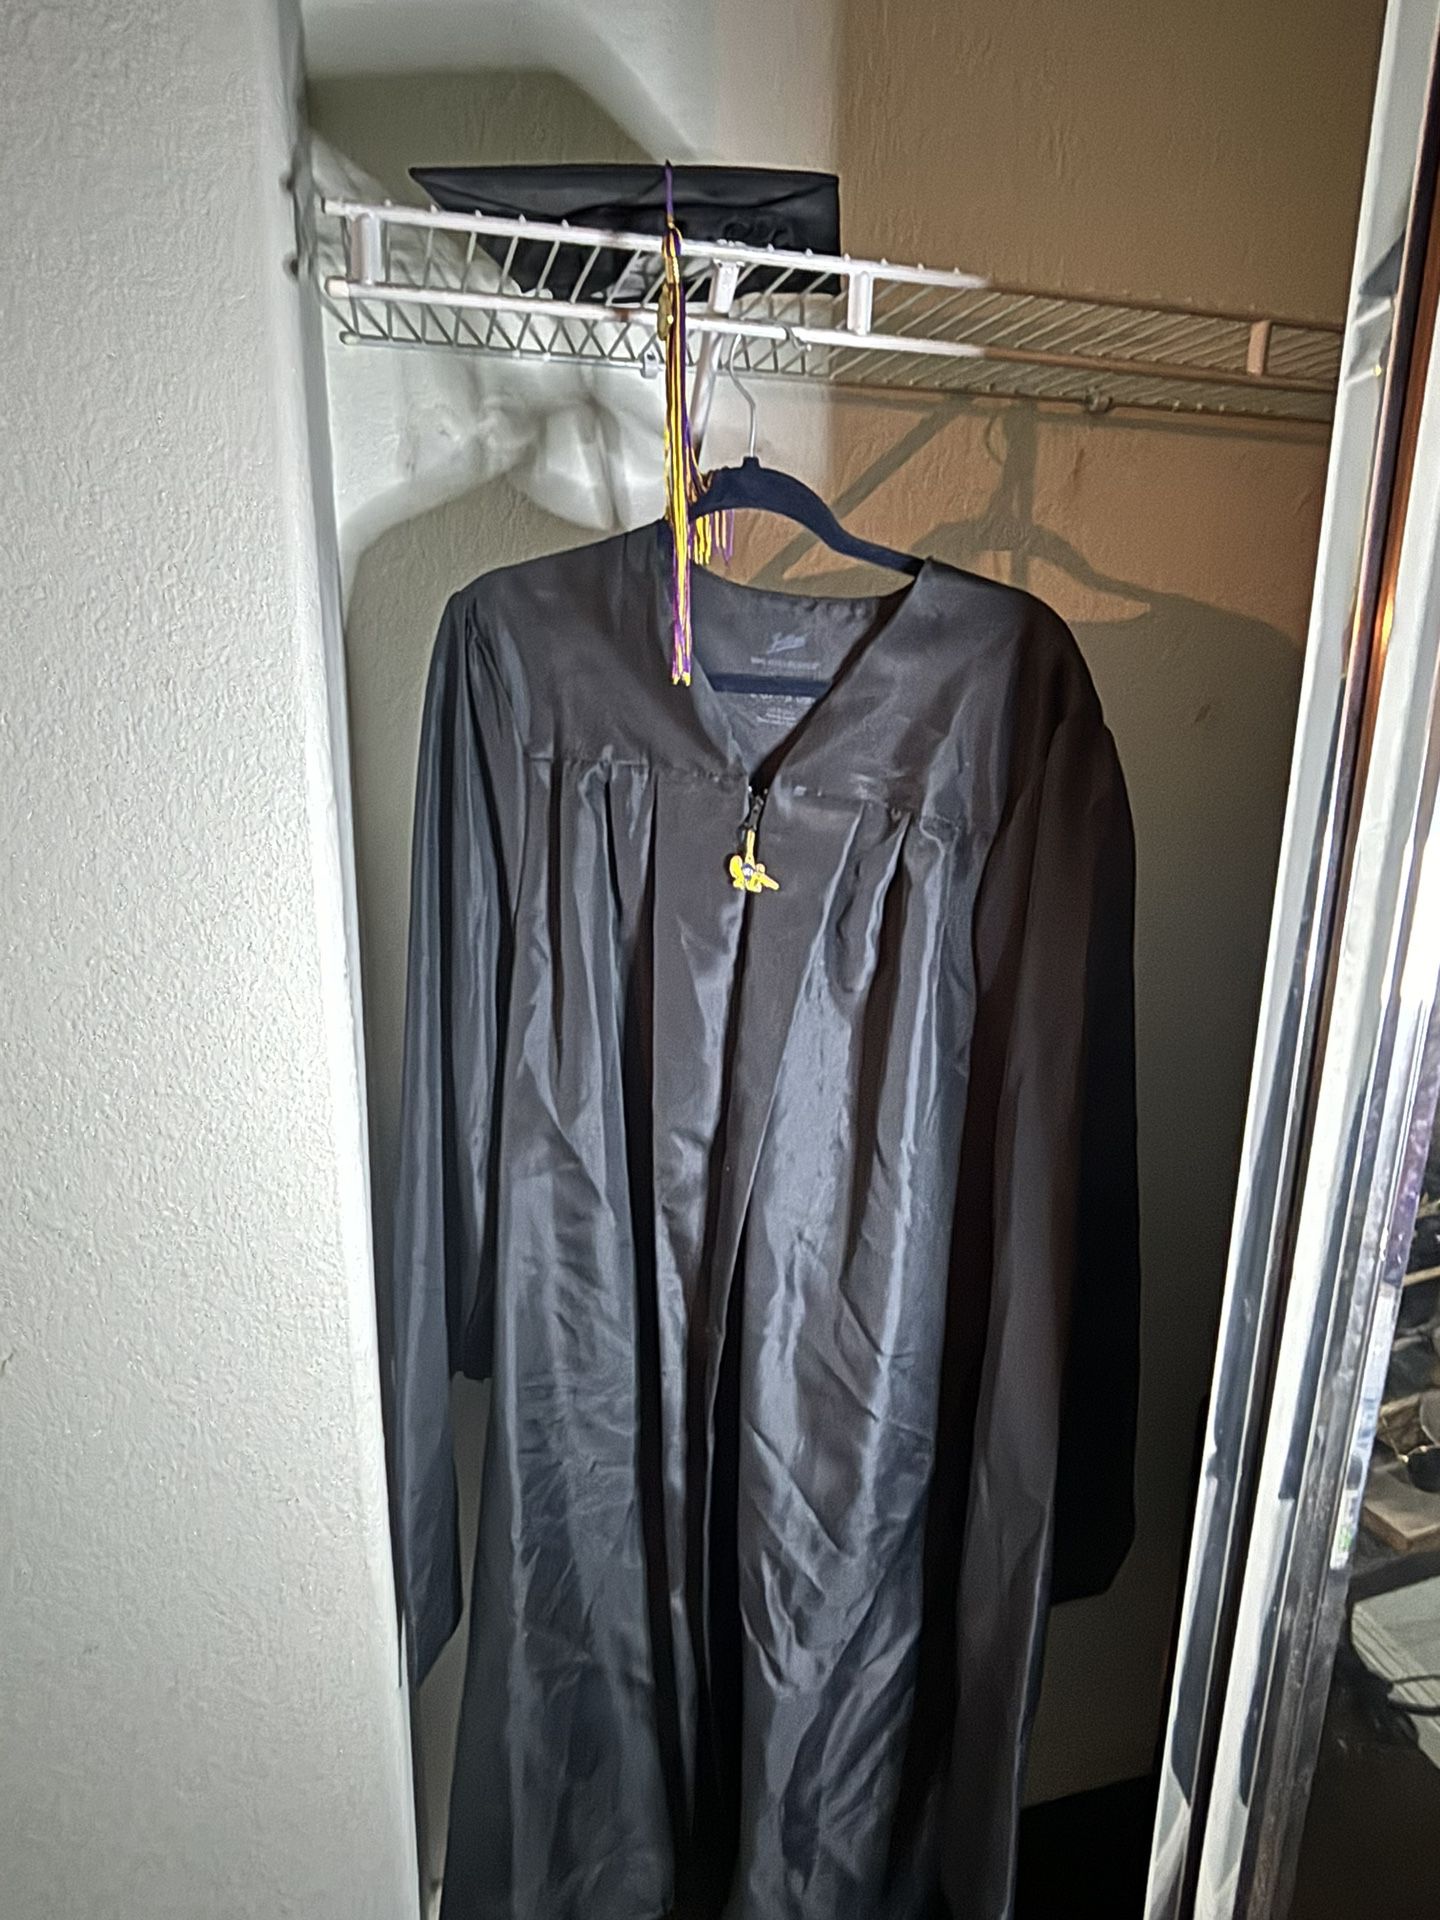 UCI masters graduation gown and hat